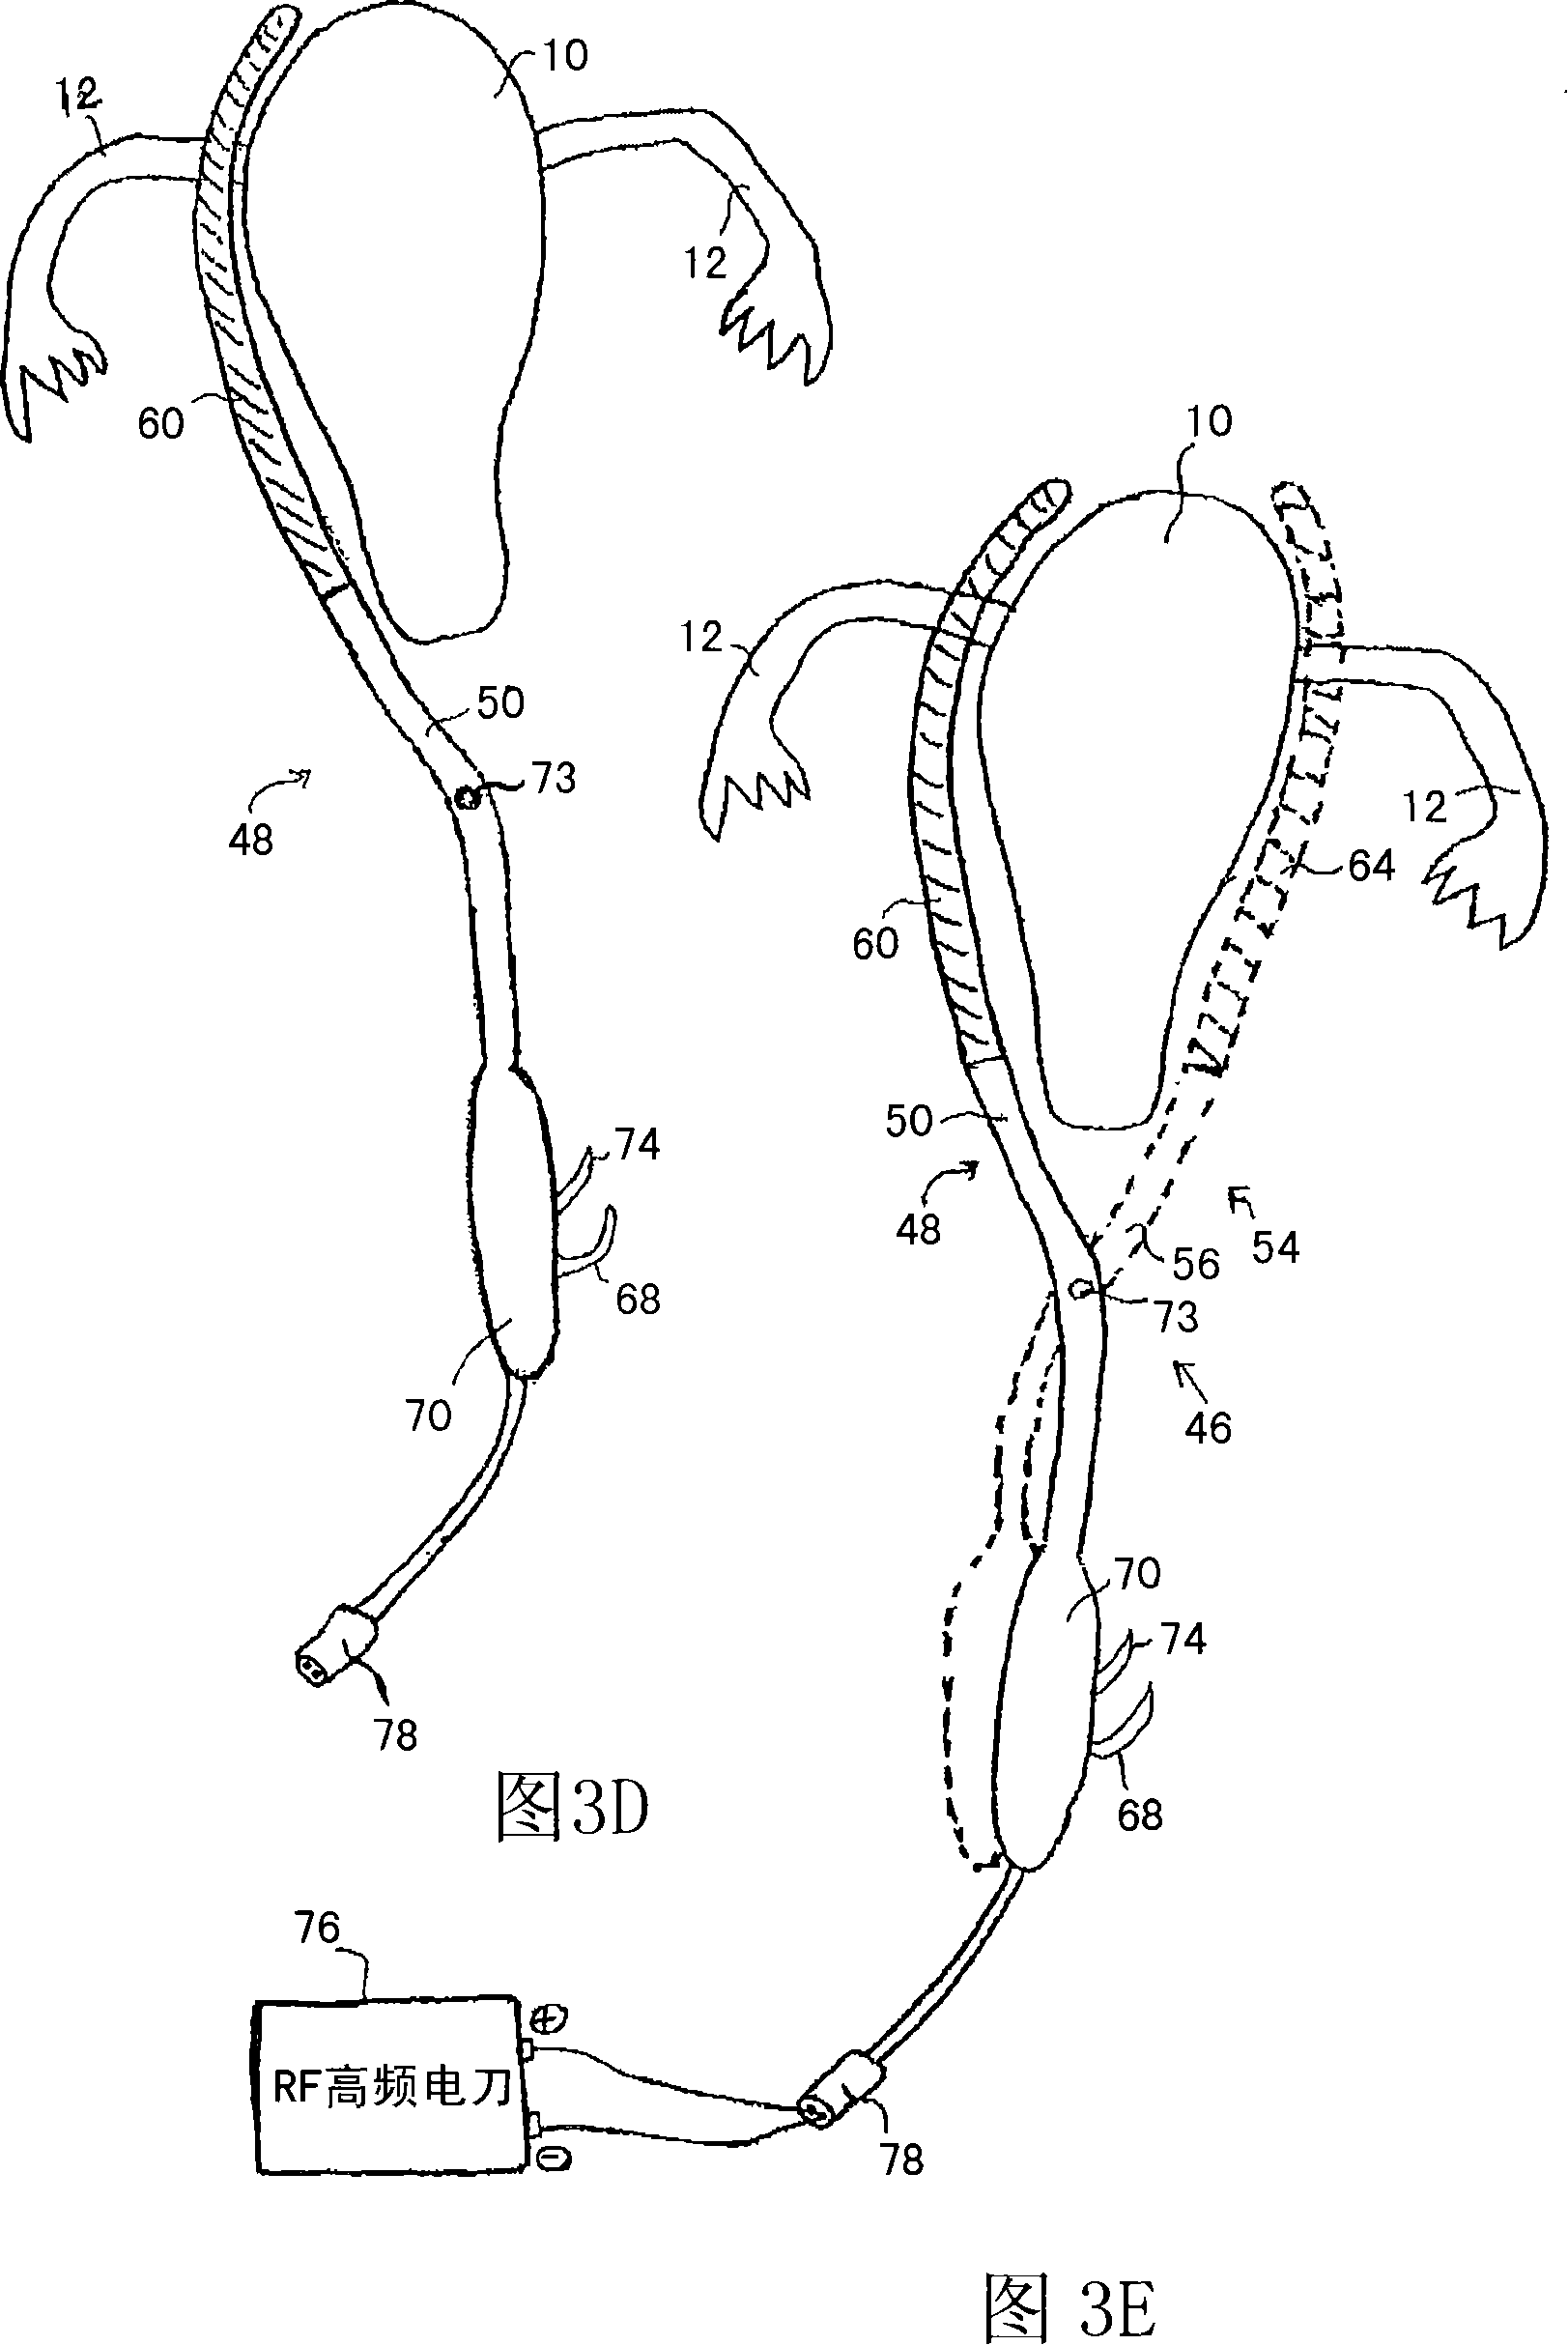 Method and apparatus for performing a surgical procedure